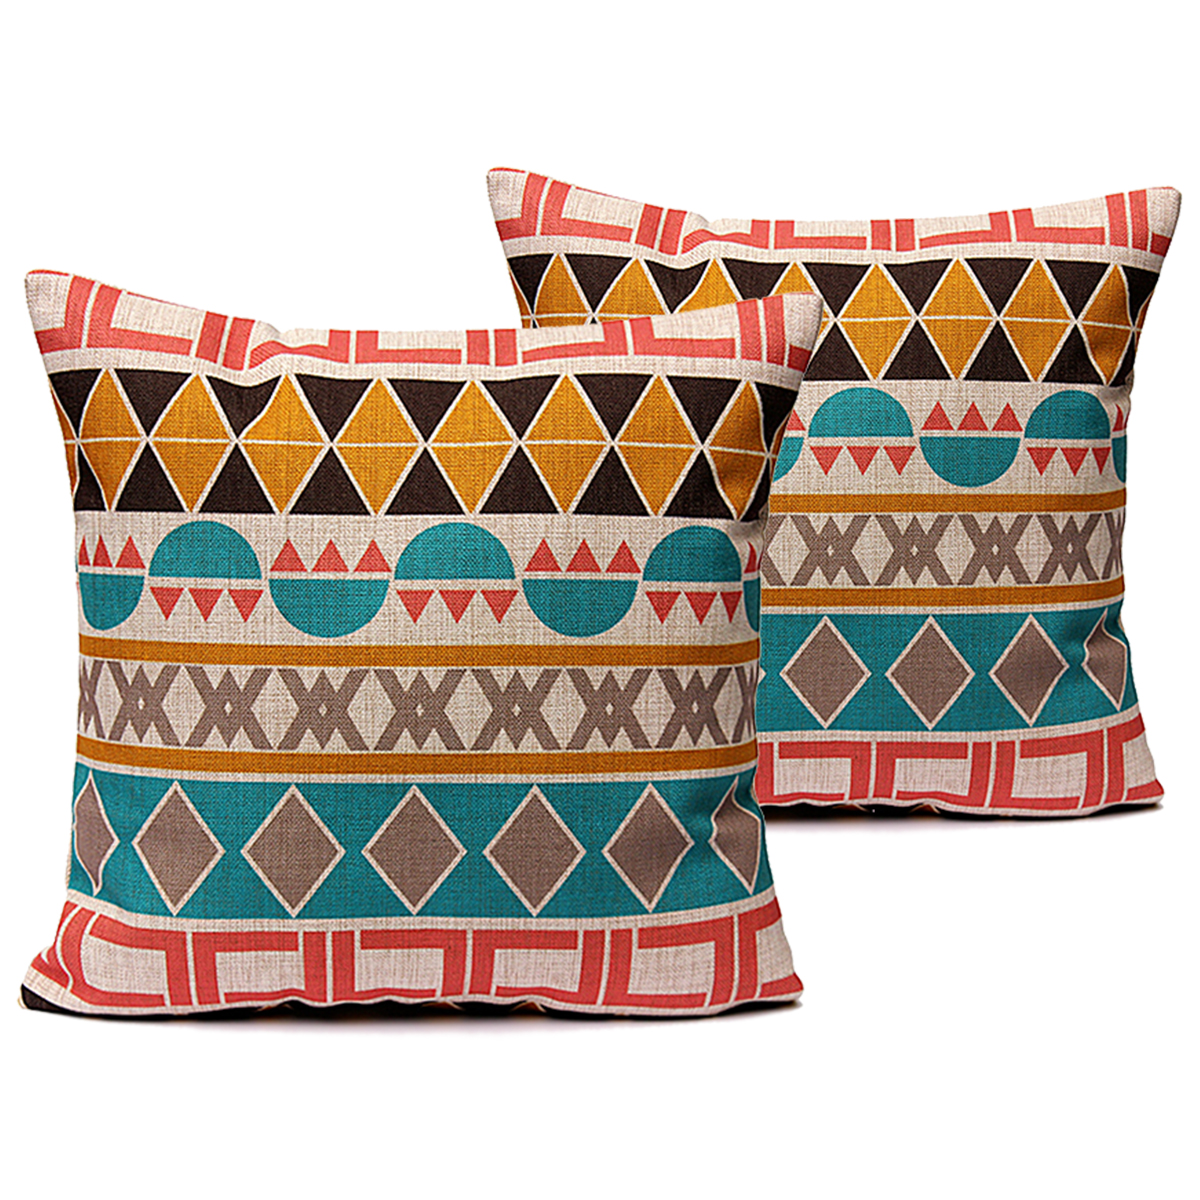 Minimalist-Style-Pillow-Case-Home-Linen-Cushion-Cover-Fashion-Colorful-Geometric-Patterns-951098-3